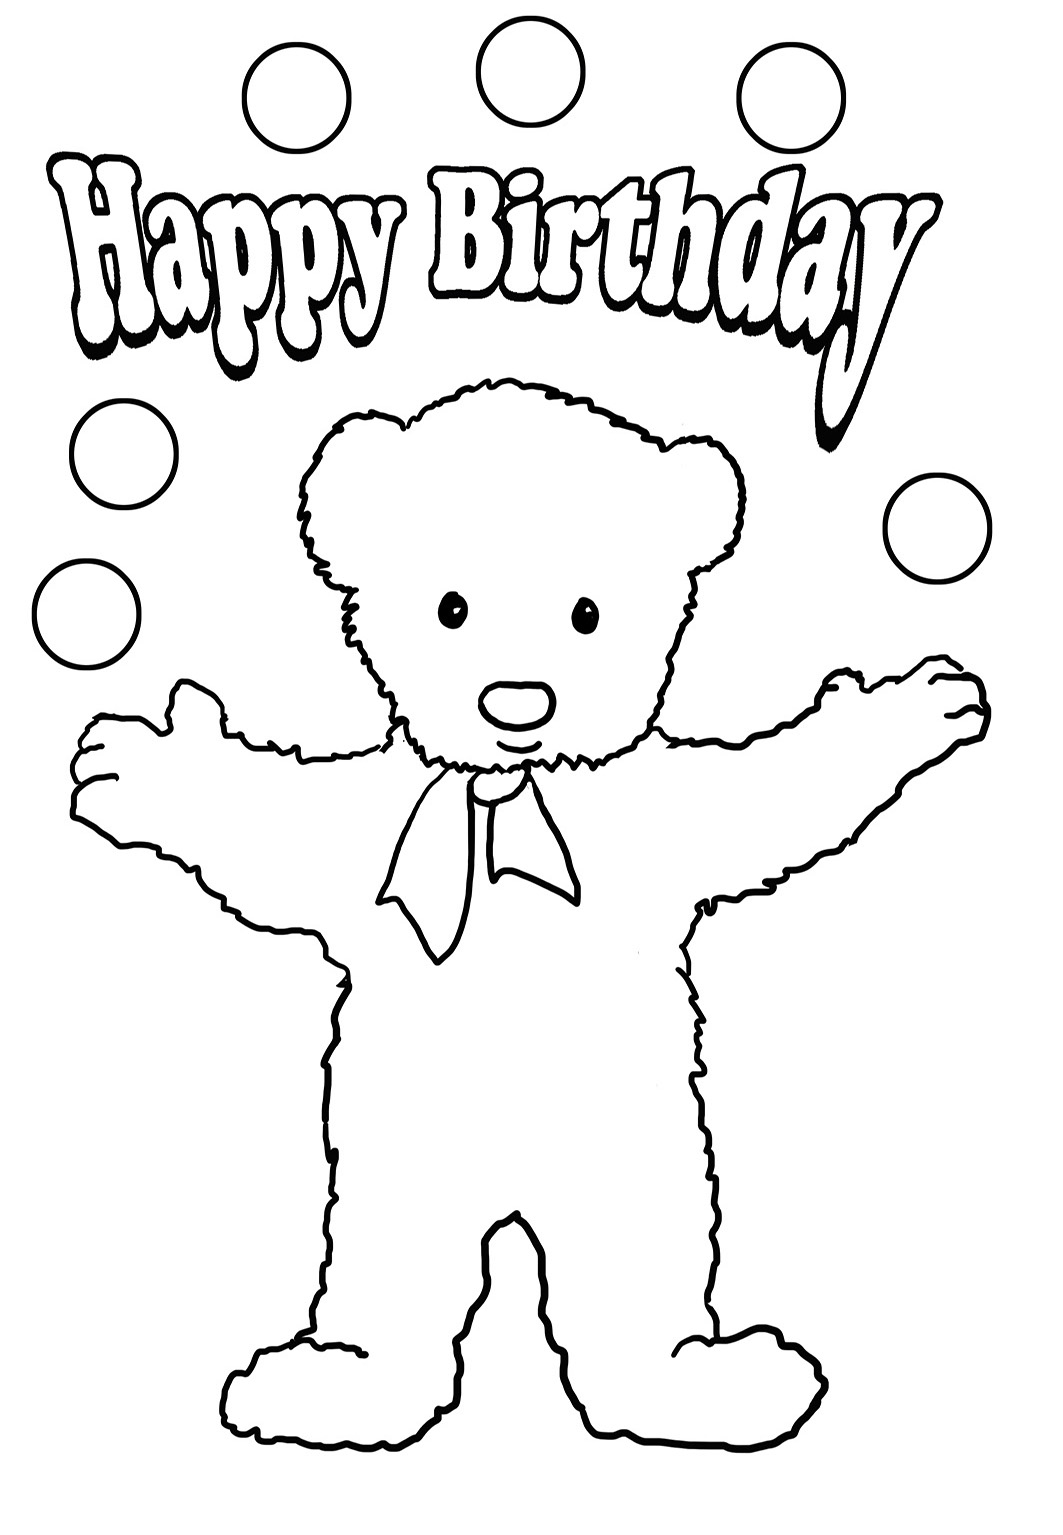 Say Happy Birthday Coloring Pages